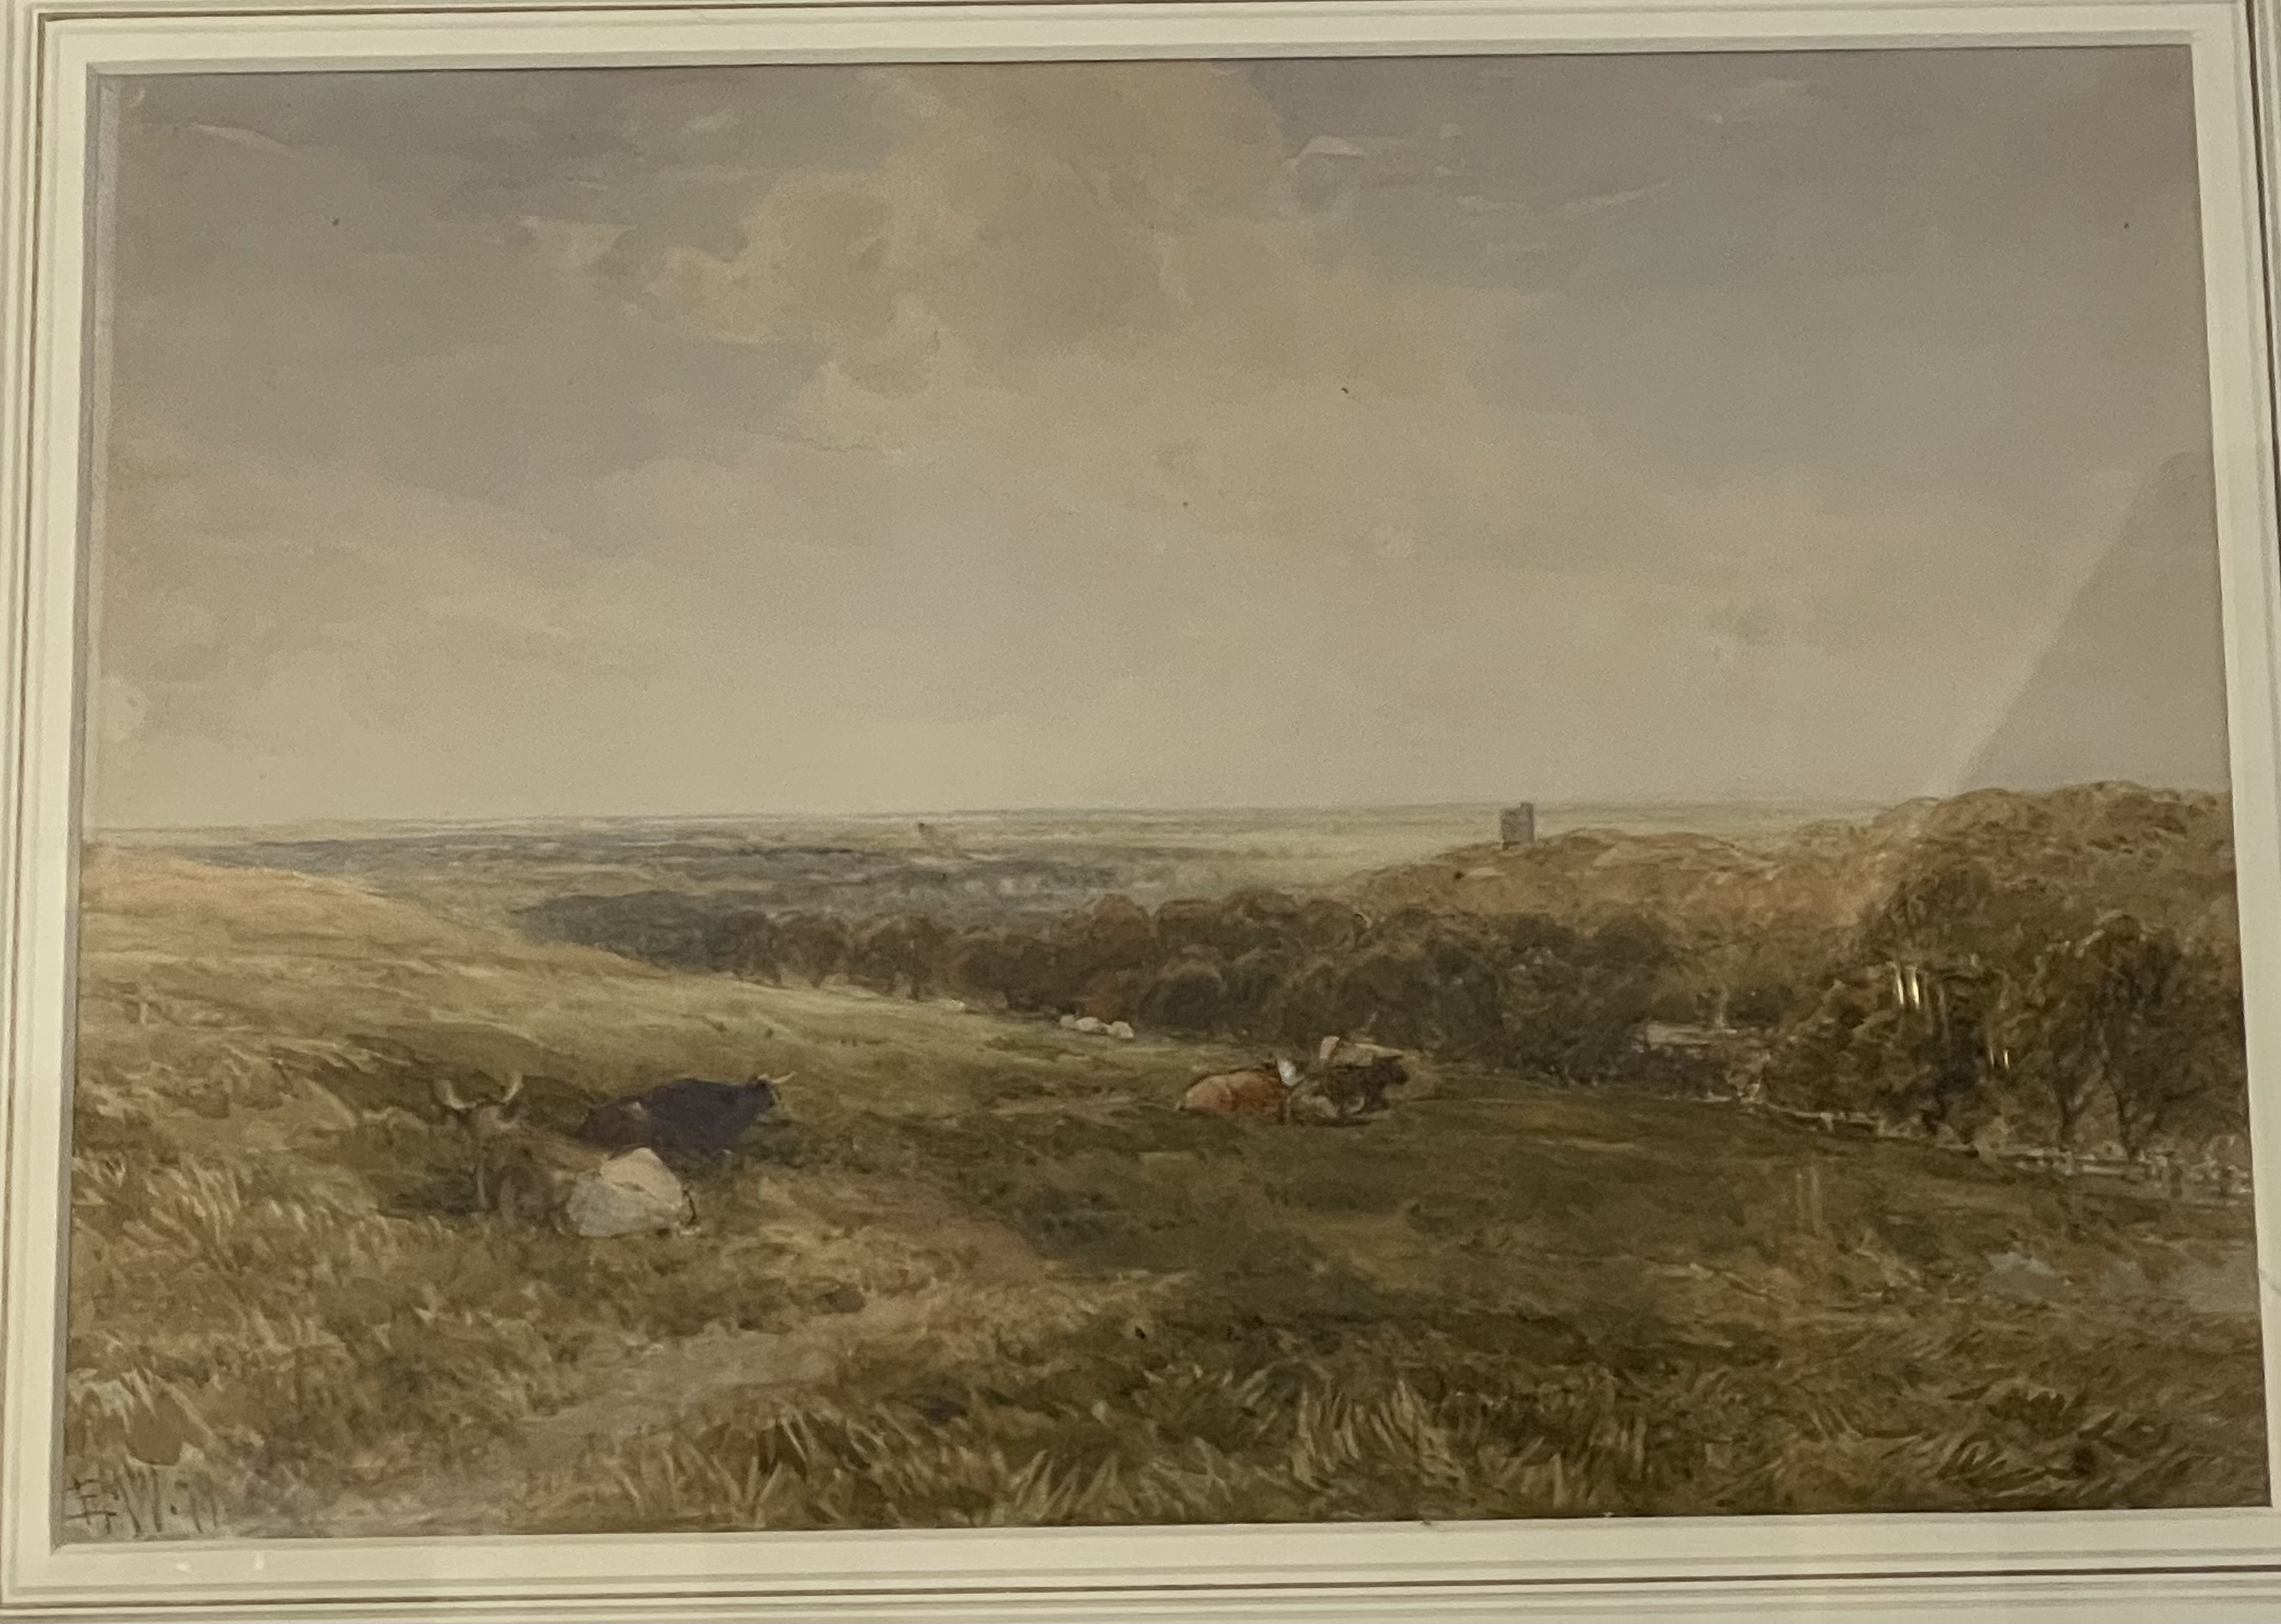 A framed watercolour by Edmond Morison Wimperis, dated 1879 depicting cattle in a pasture - Image 2 of 2